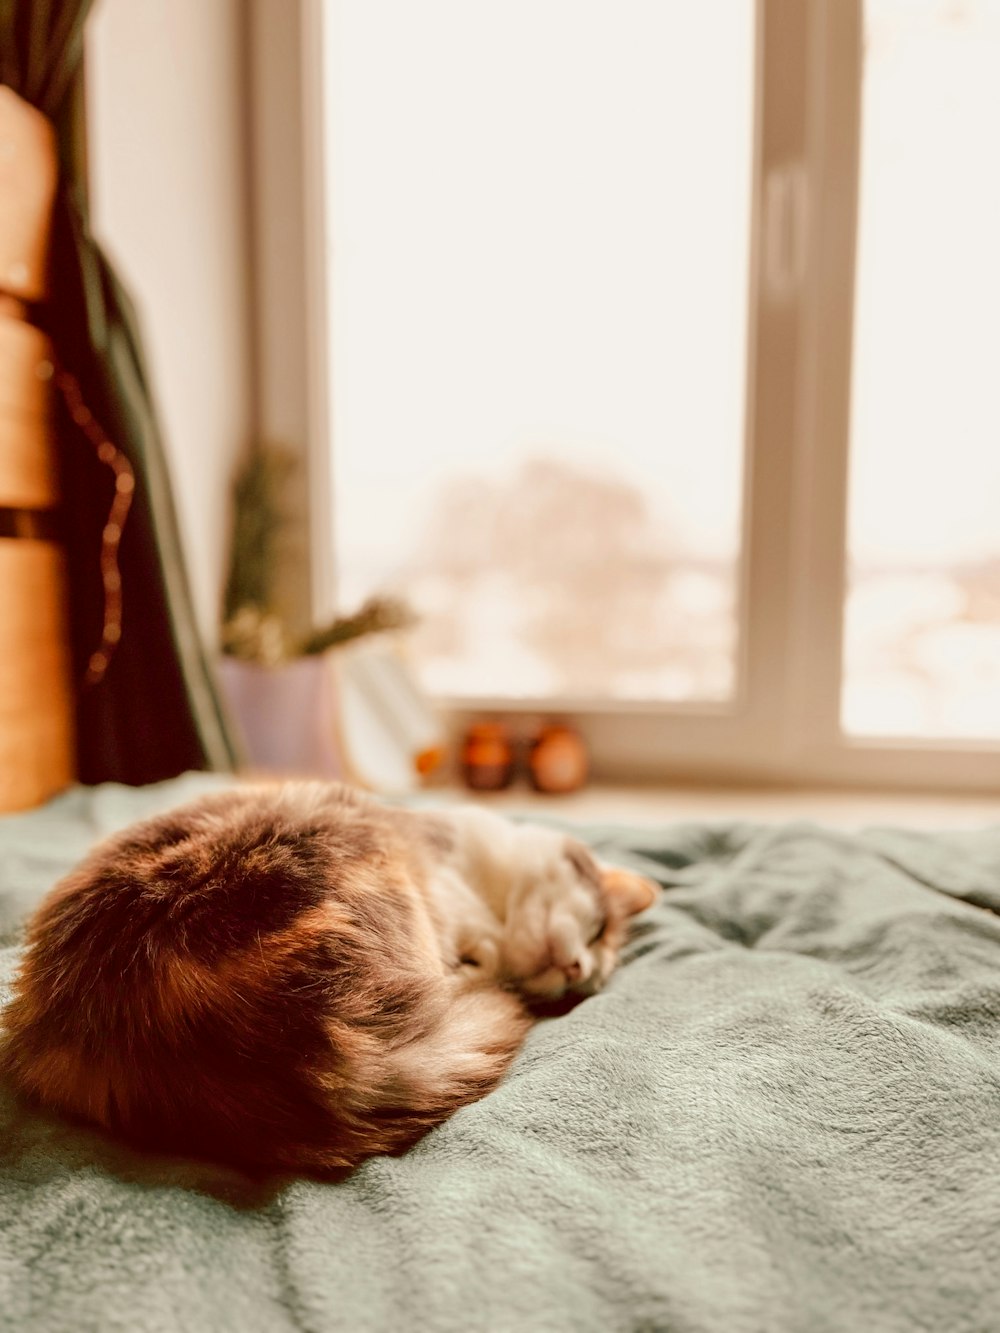 a cat sleeping on a bed in front of a window